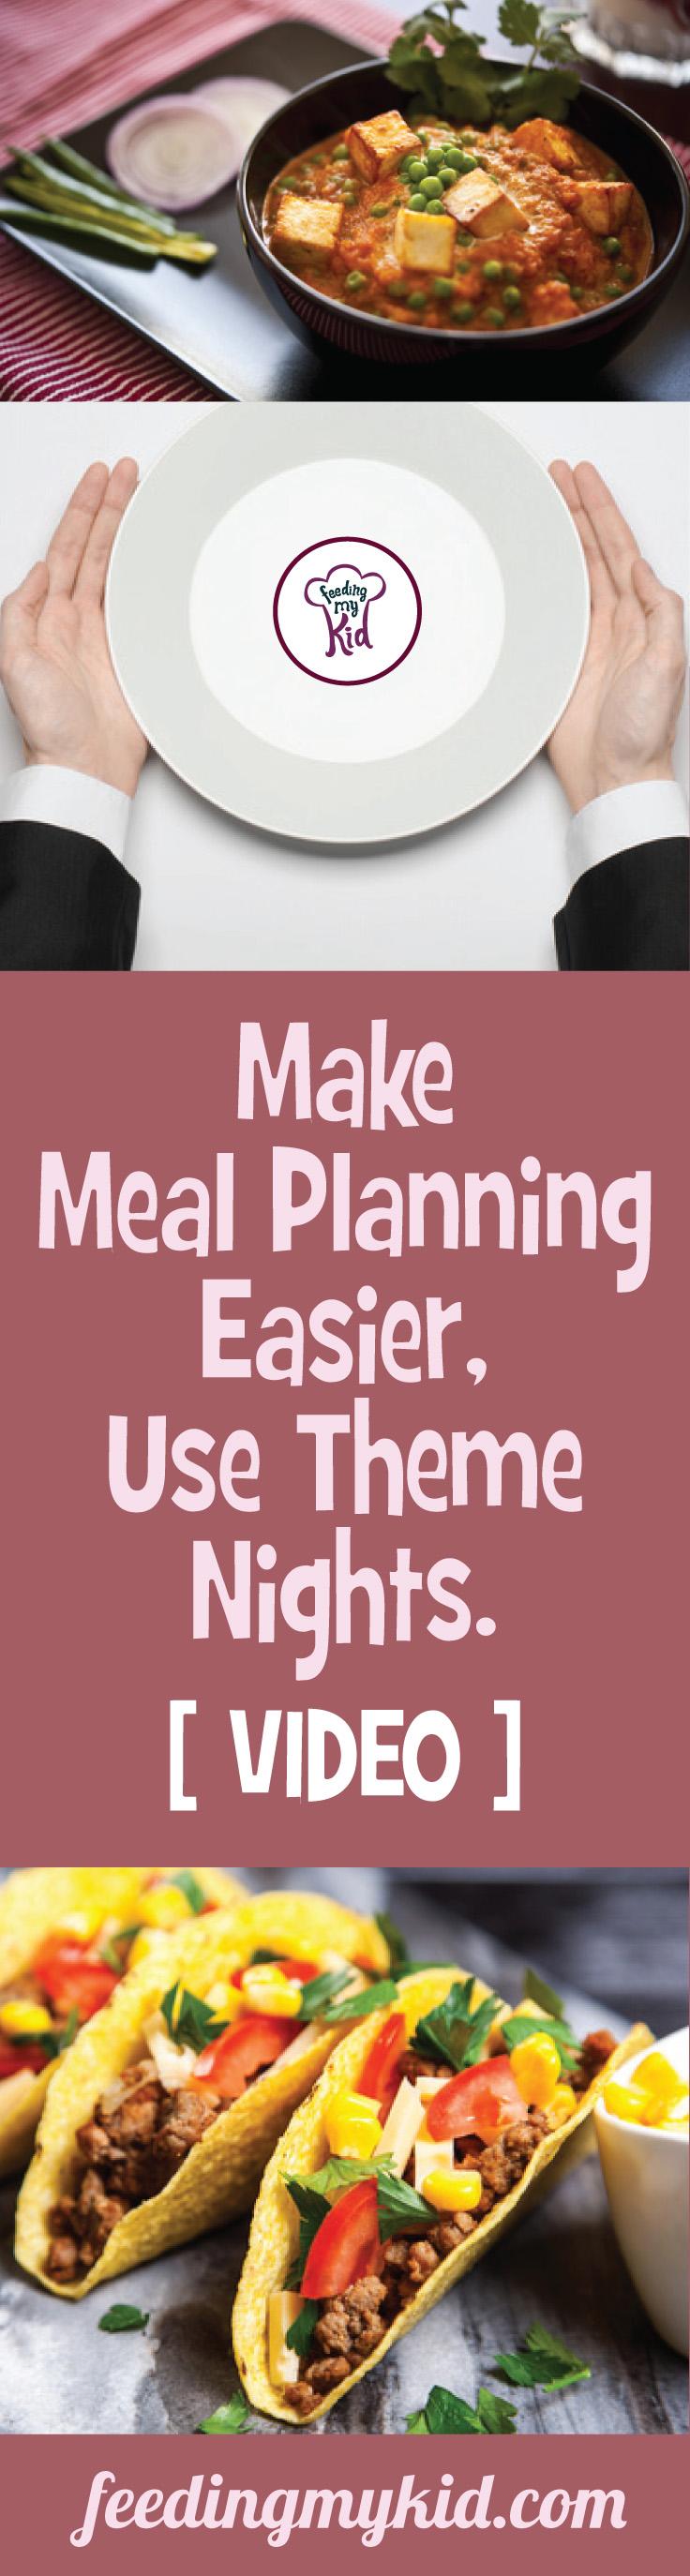 This is a must pin! Tired of coking the same? Get inspired with this video to start serving up some amazing theme night ides. Feeding My Kid is a site filled with all the information you need on how to raise your kids and take care of your family; from healthy tips to nutritious recipes. We have everything you need! #videos #recipes #mealplanning #themenights